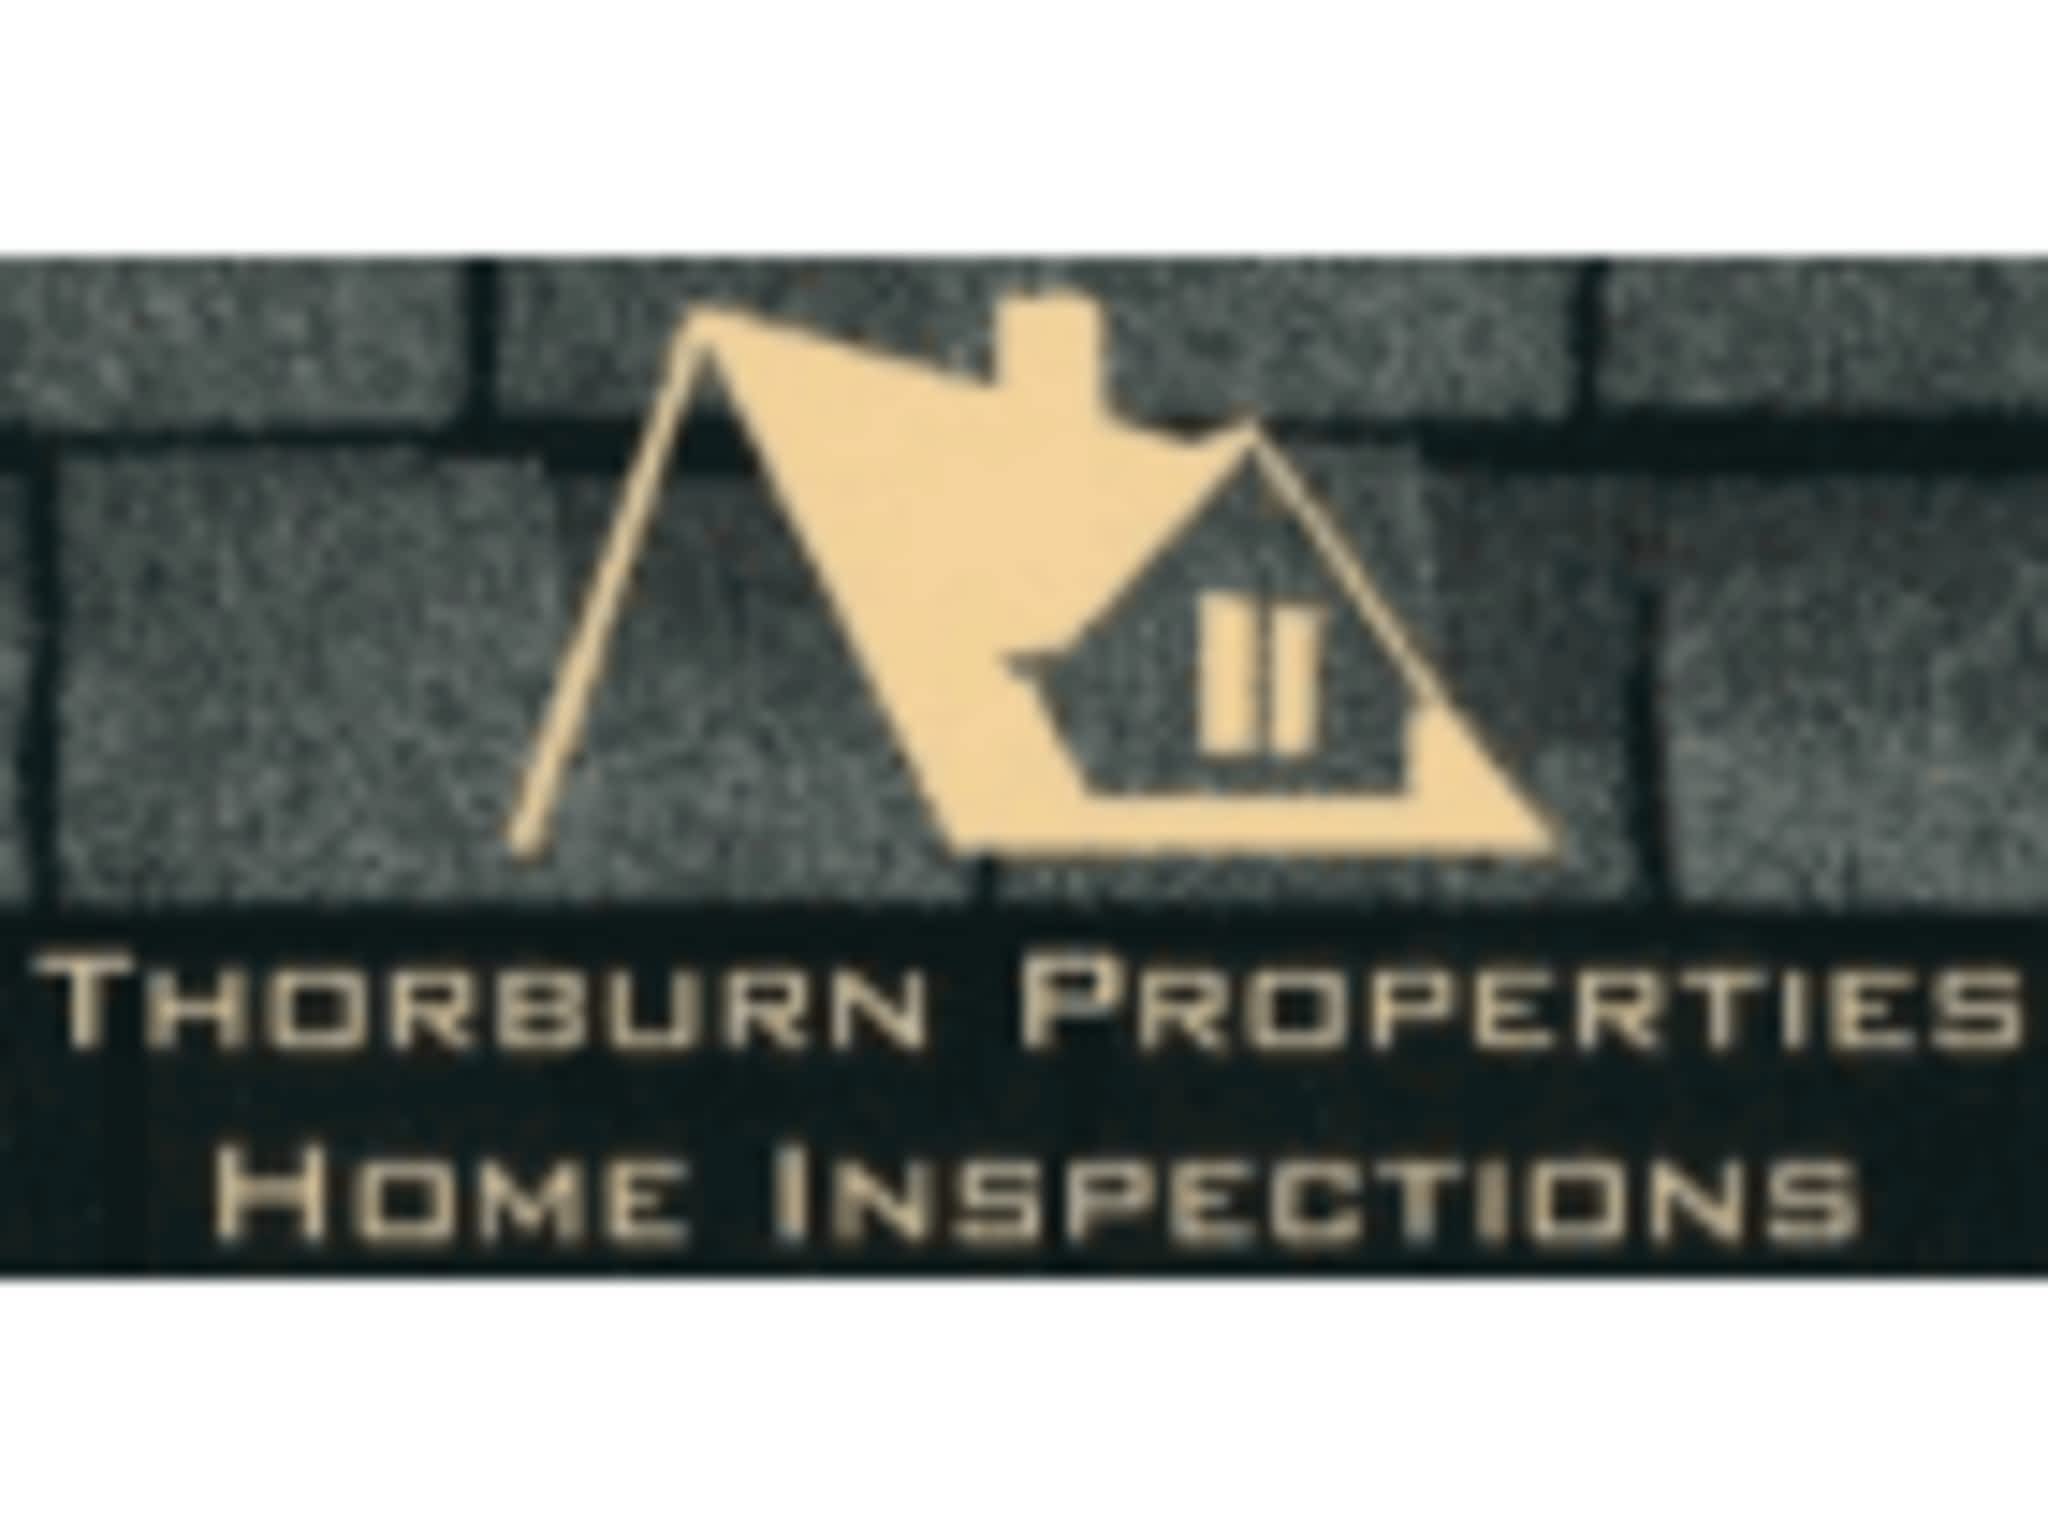 photo Thorburn Properties Inc Home Inspections